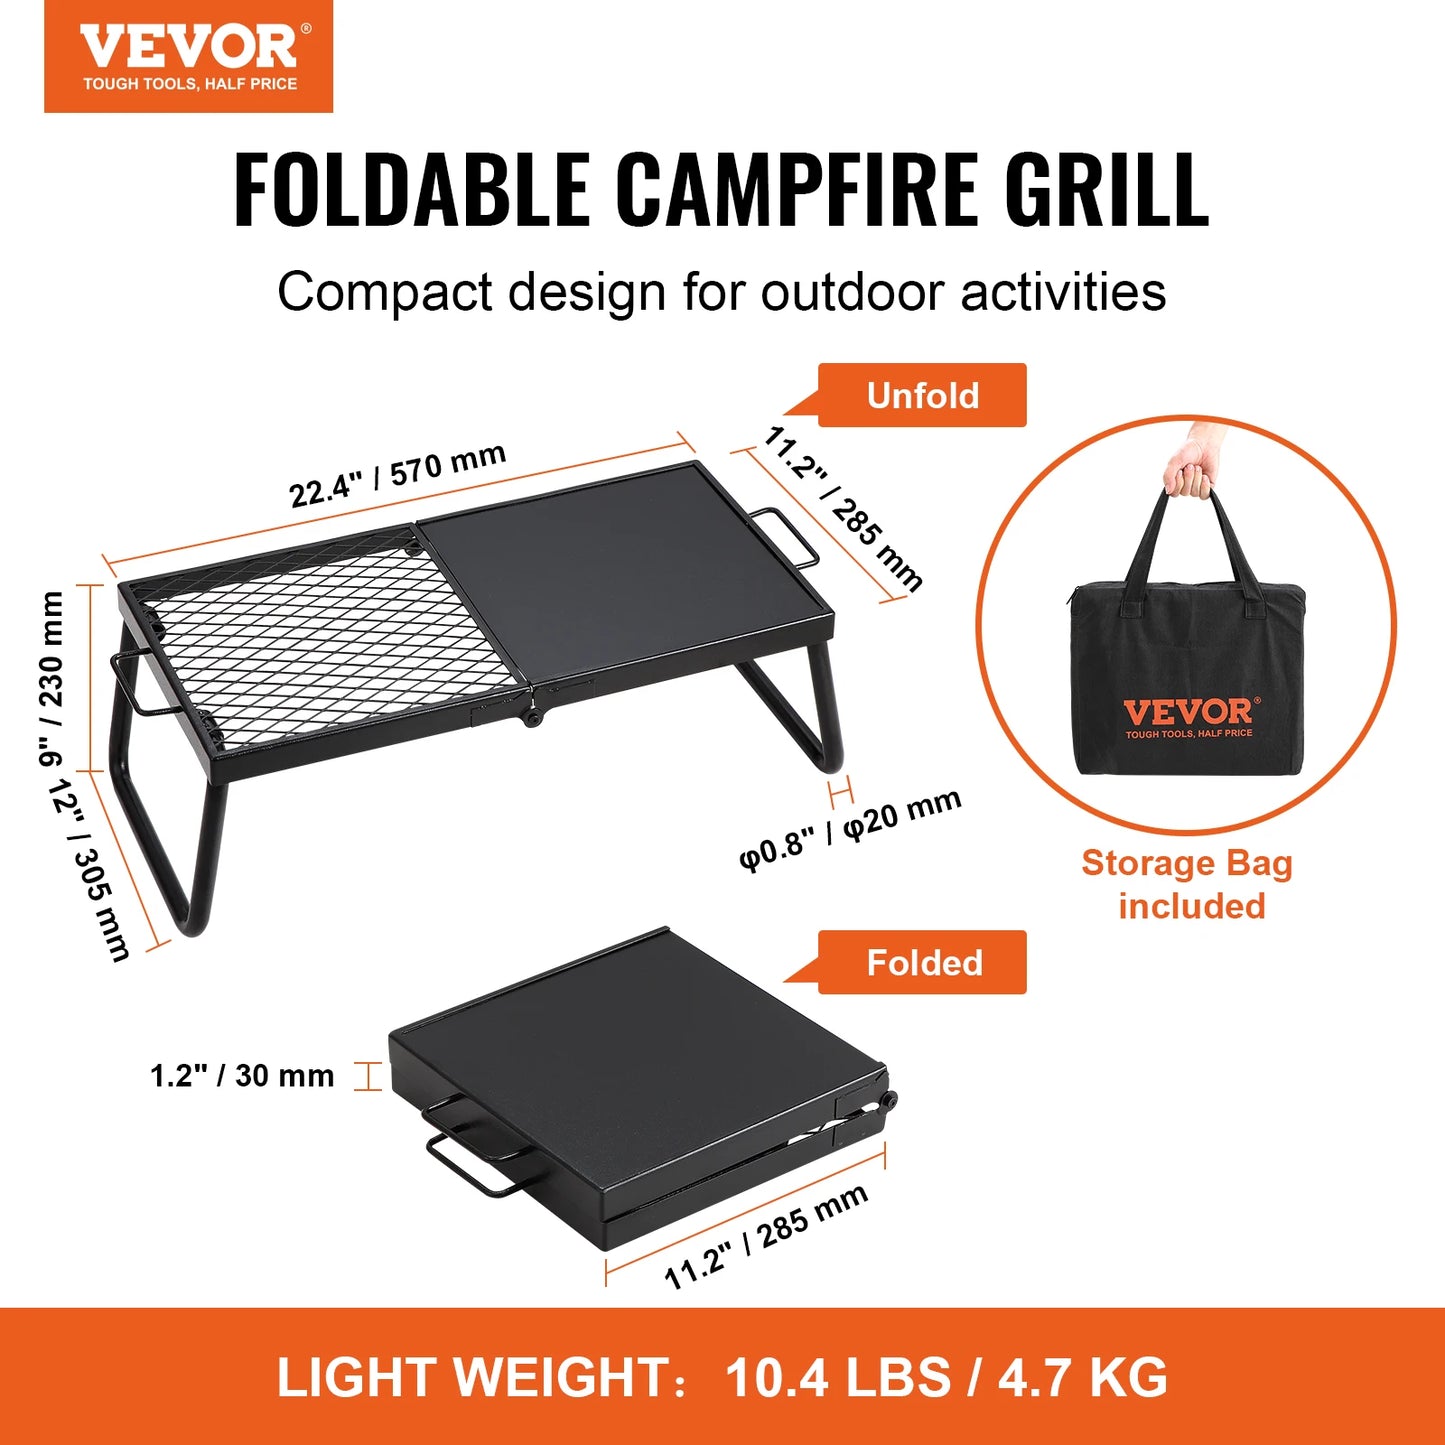 VEVOR Folding Campfire Grill, Portable Camping Grate